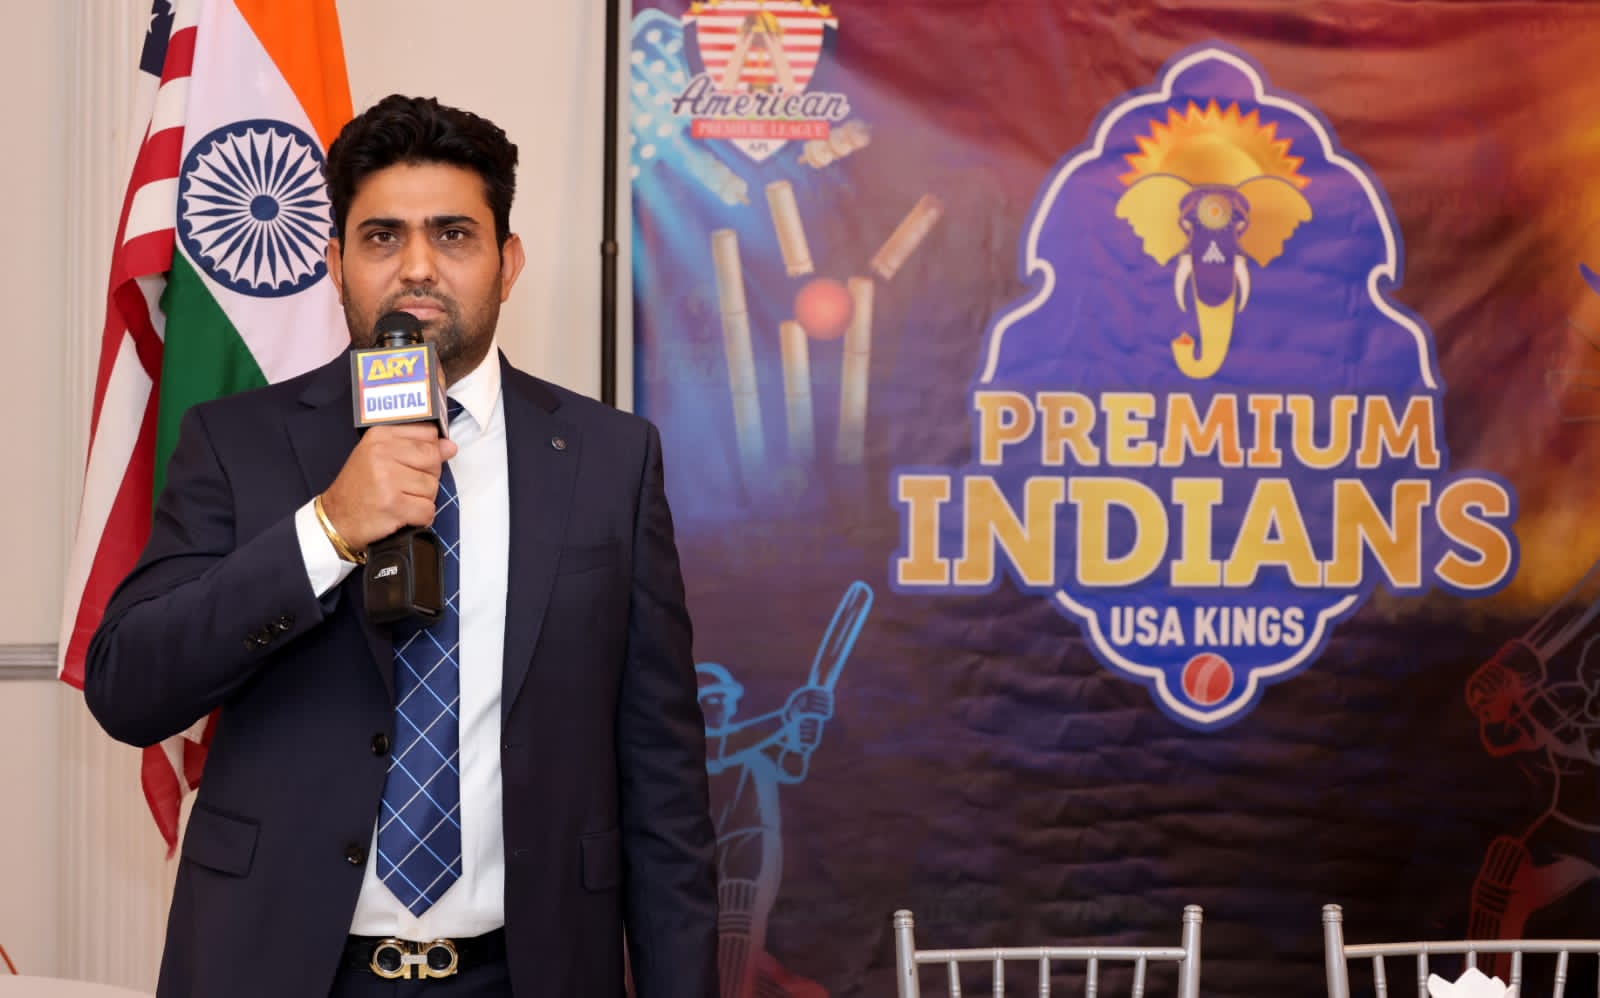 PREMIUM INDIANS USA KINGS TEAM LAUNCHED AS PROFESSIONAL LEAGUE ARRIVES